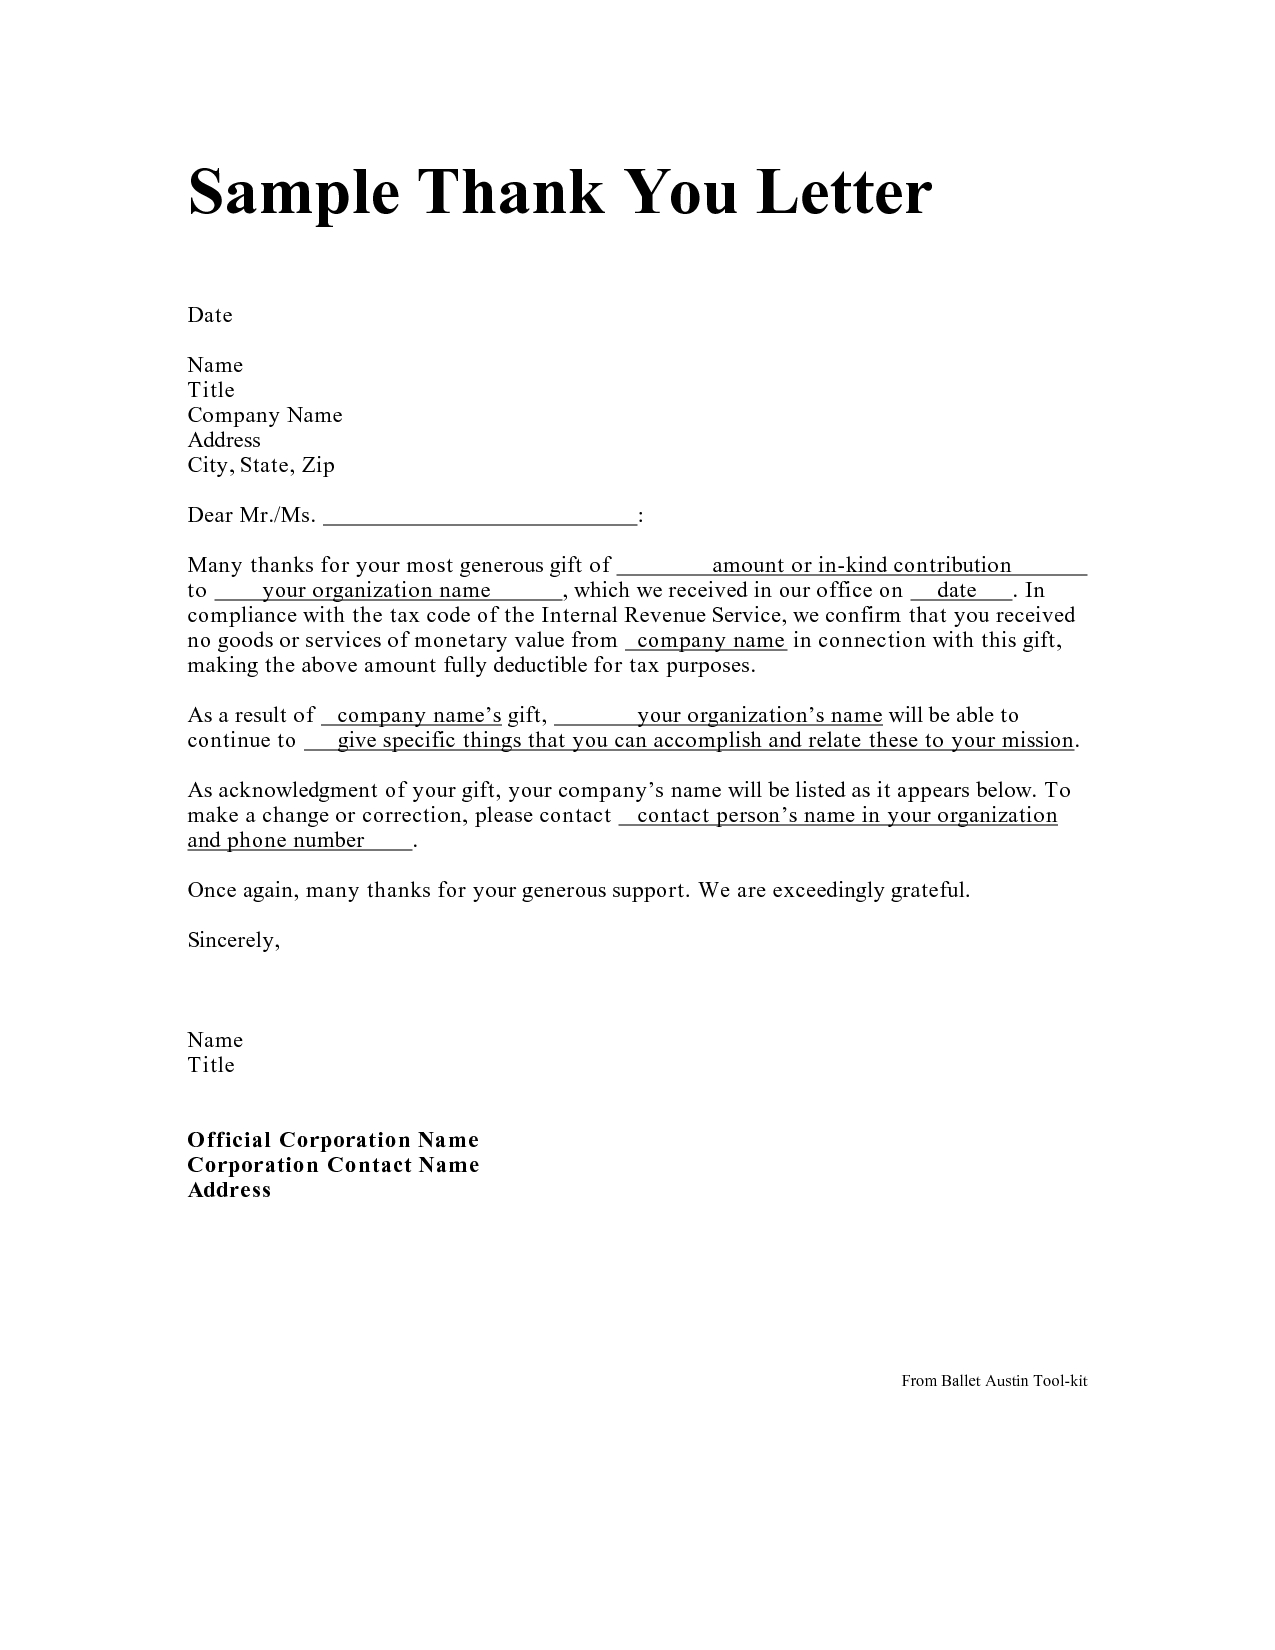 Mission Support Letter Template - Personal Thank You Letter Personal Thank You Letter Samples